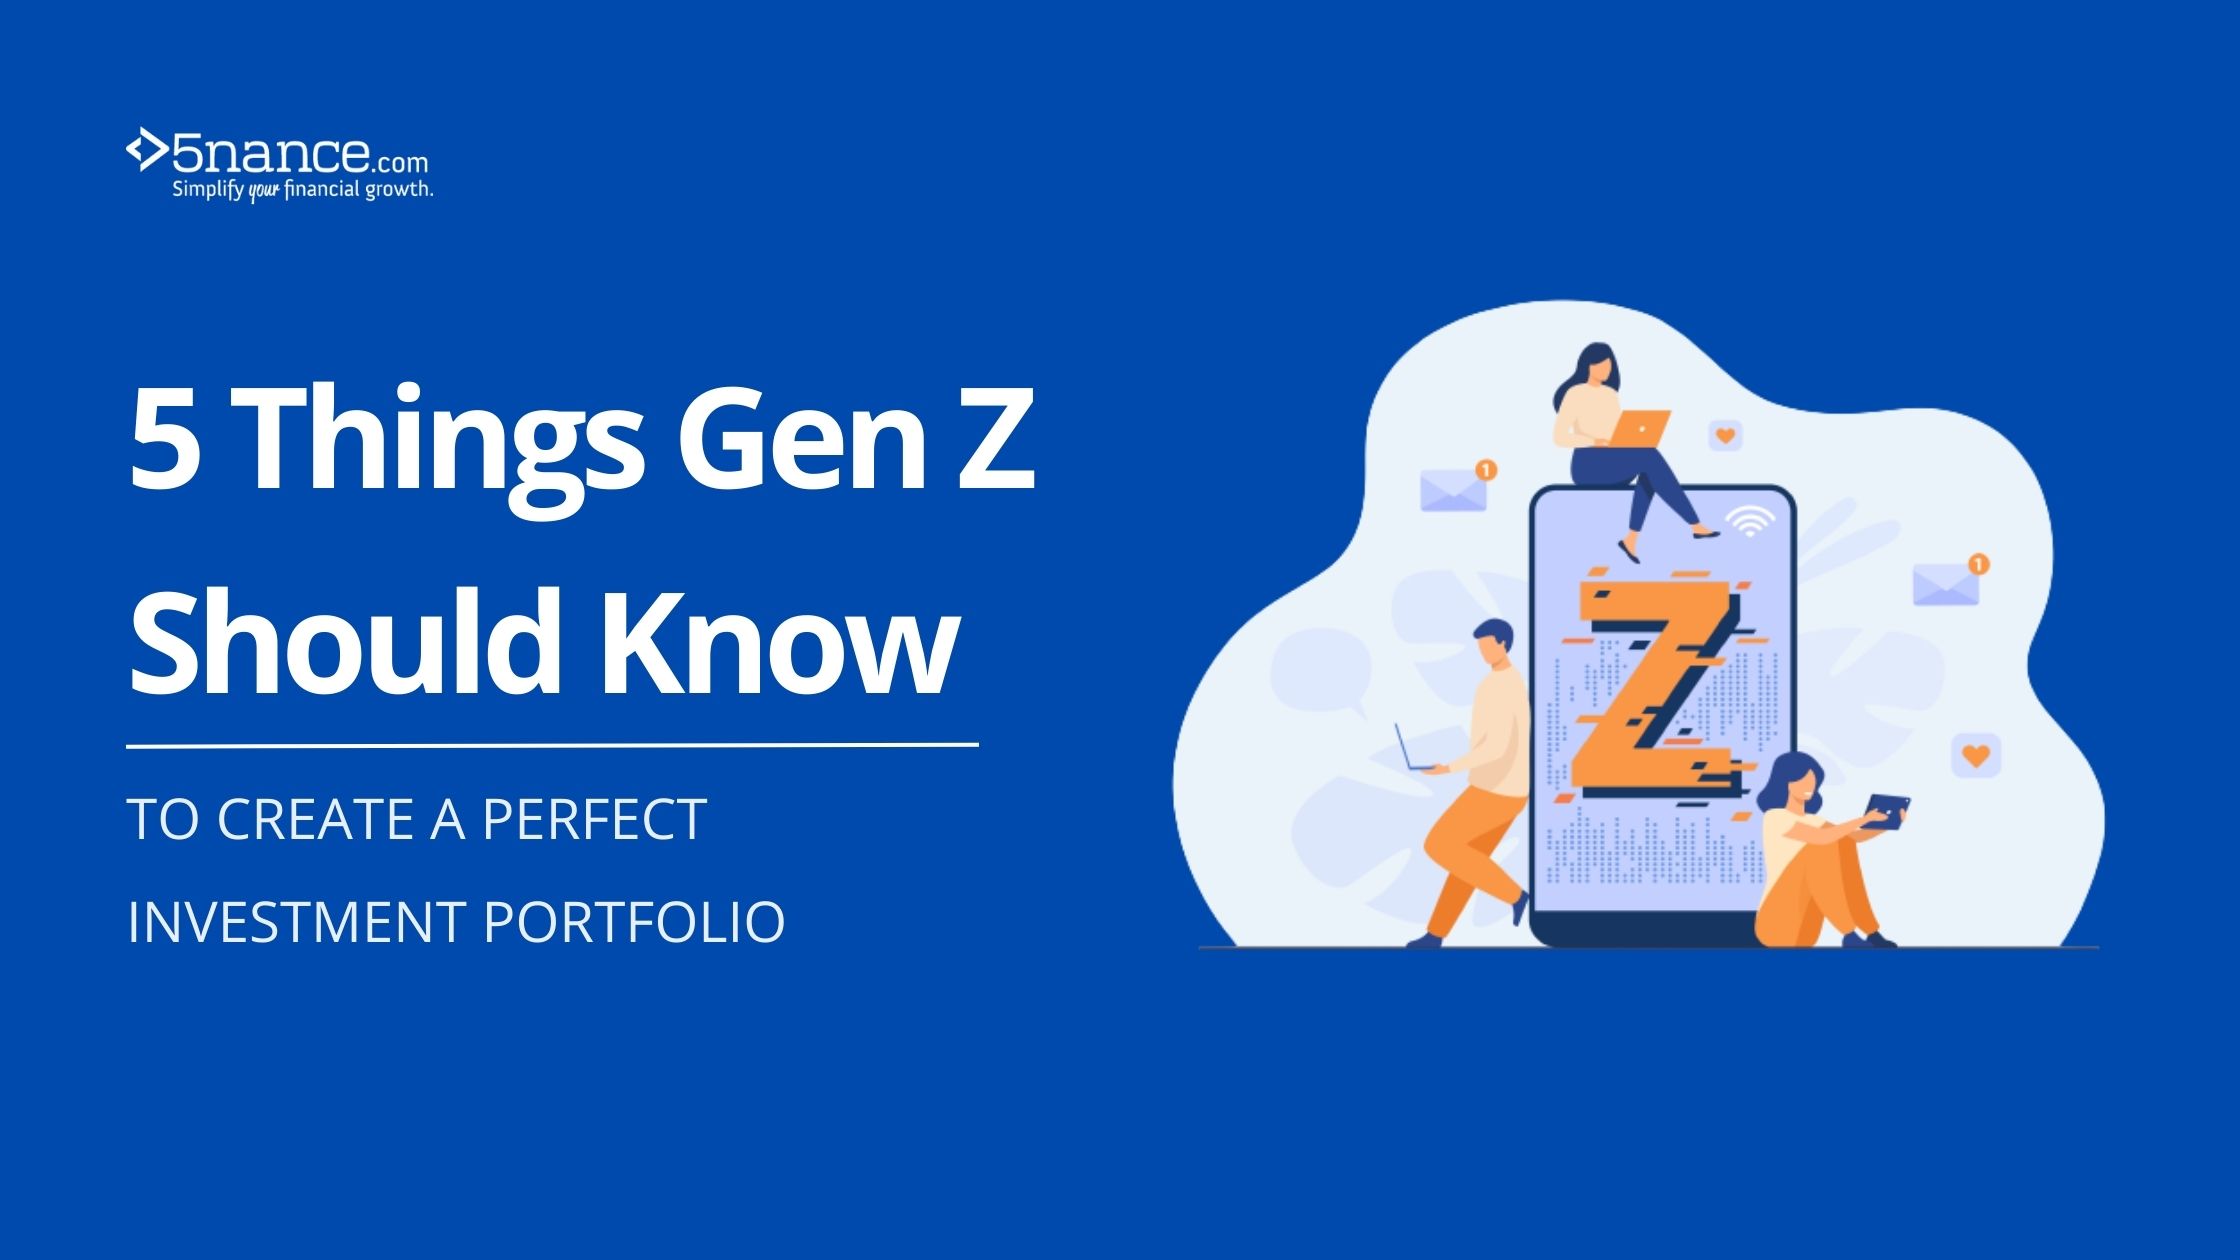 5 things Gen Z should know about creating their first Investment Portfolio